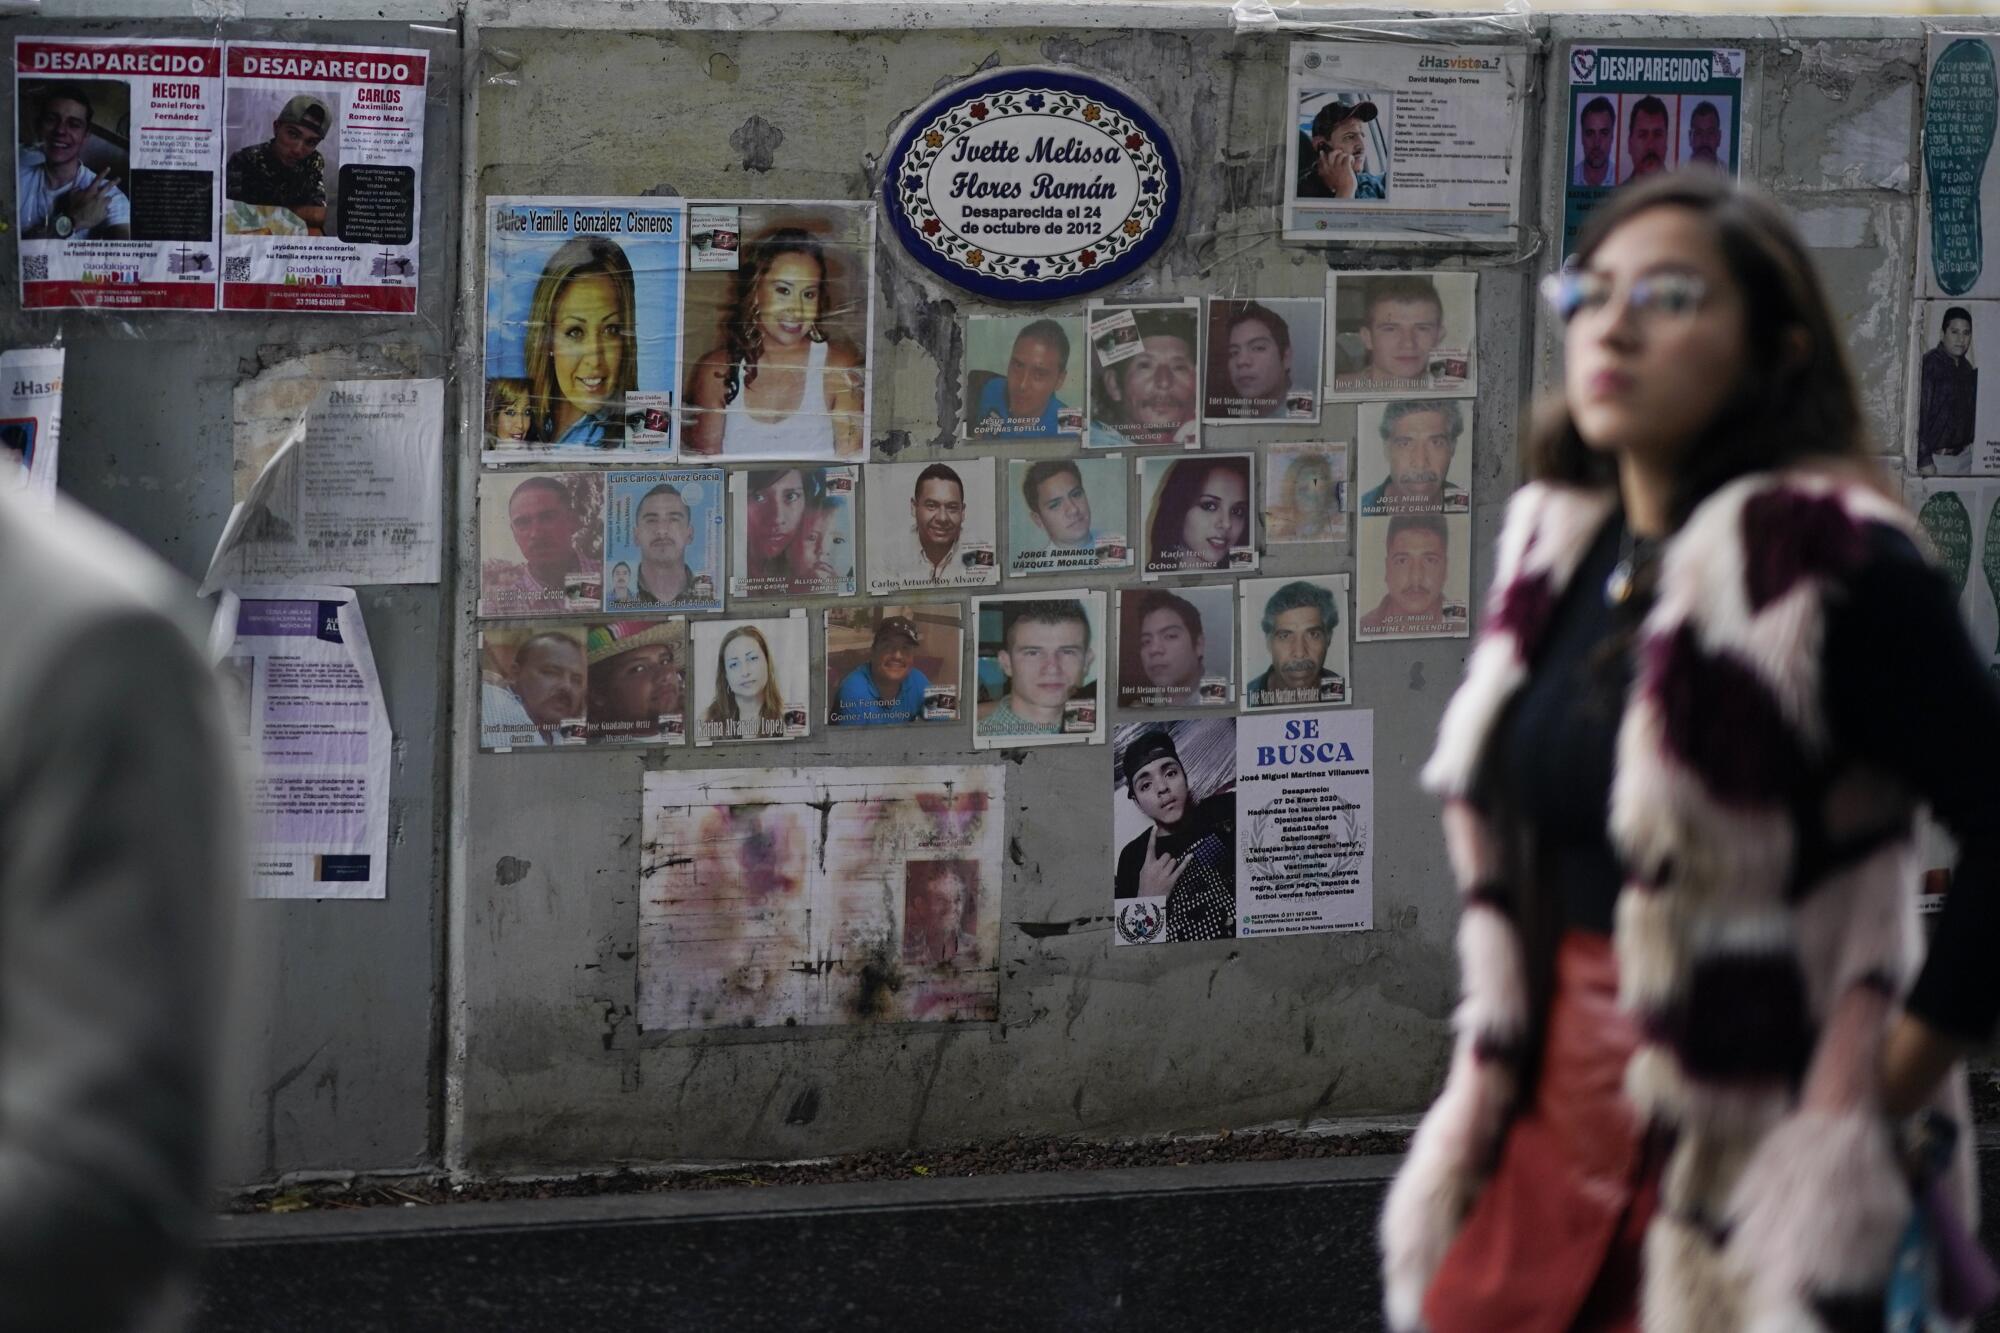 A woman with dark hair and wearing glasses walks near a wall bearing photographs of individual people 